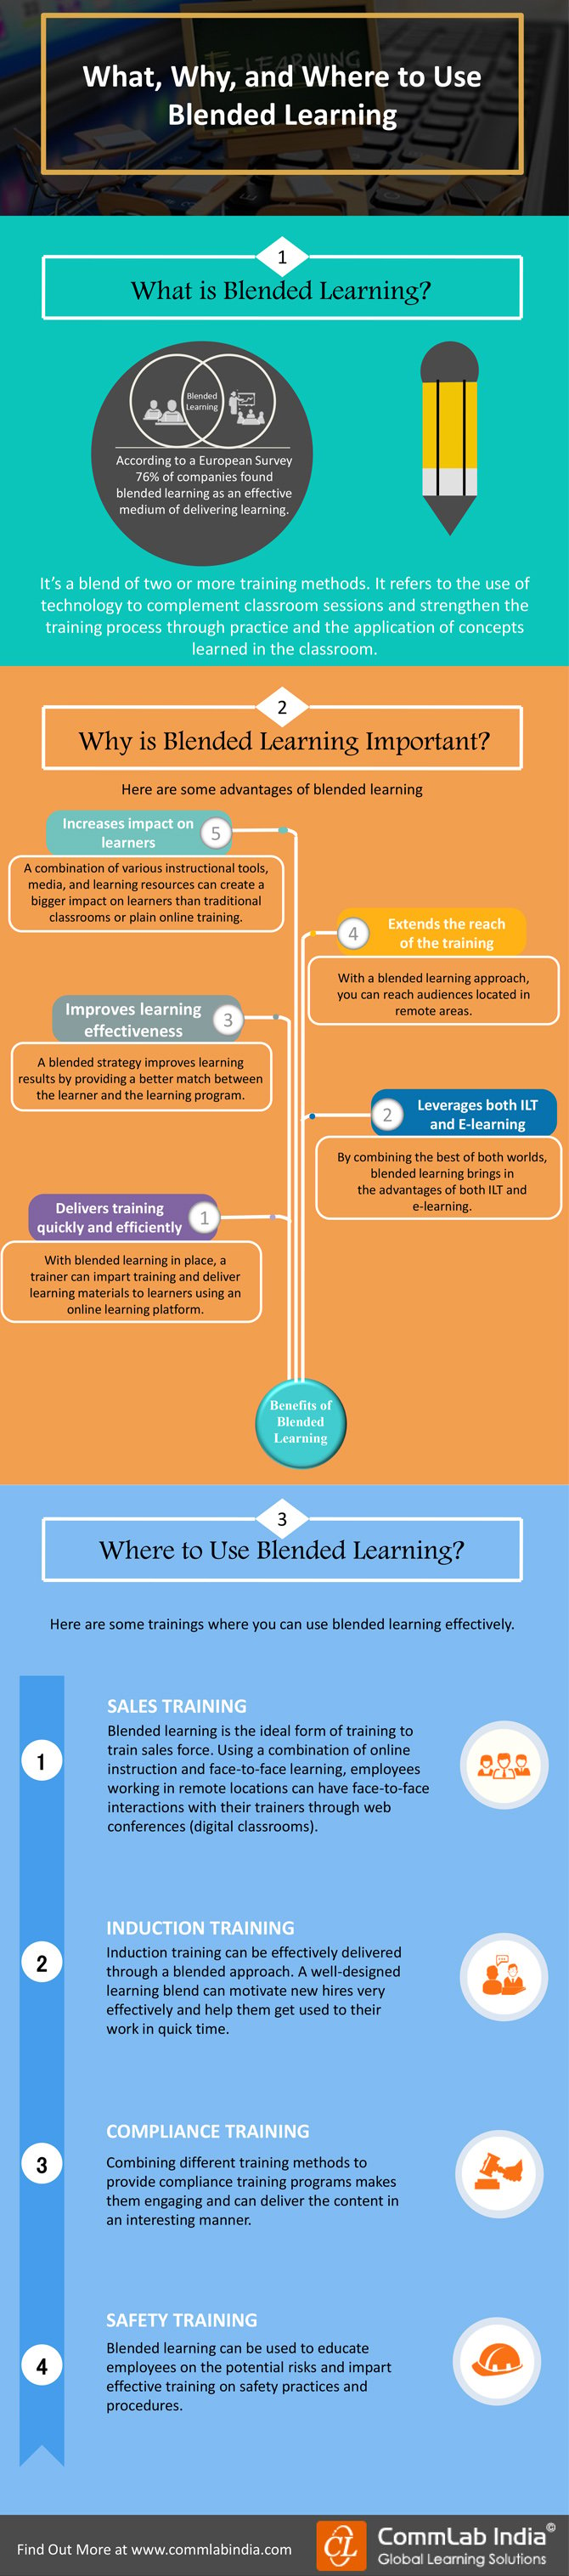 What, Why, and Where to Use Blended Learning [Infographic]